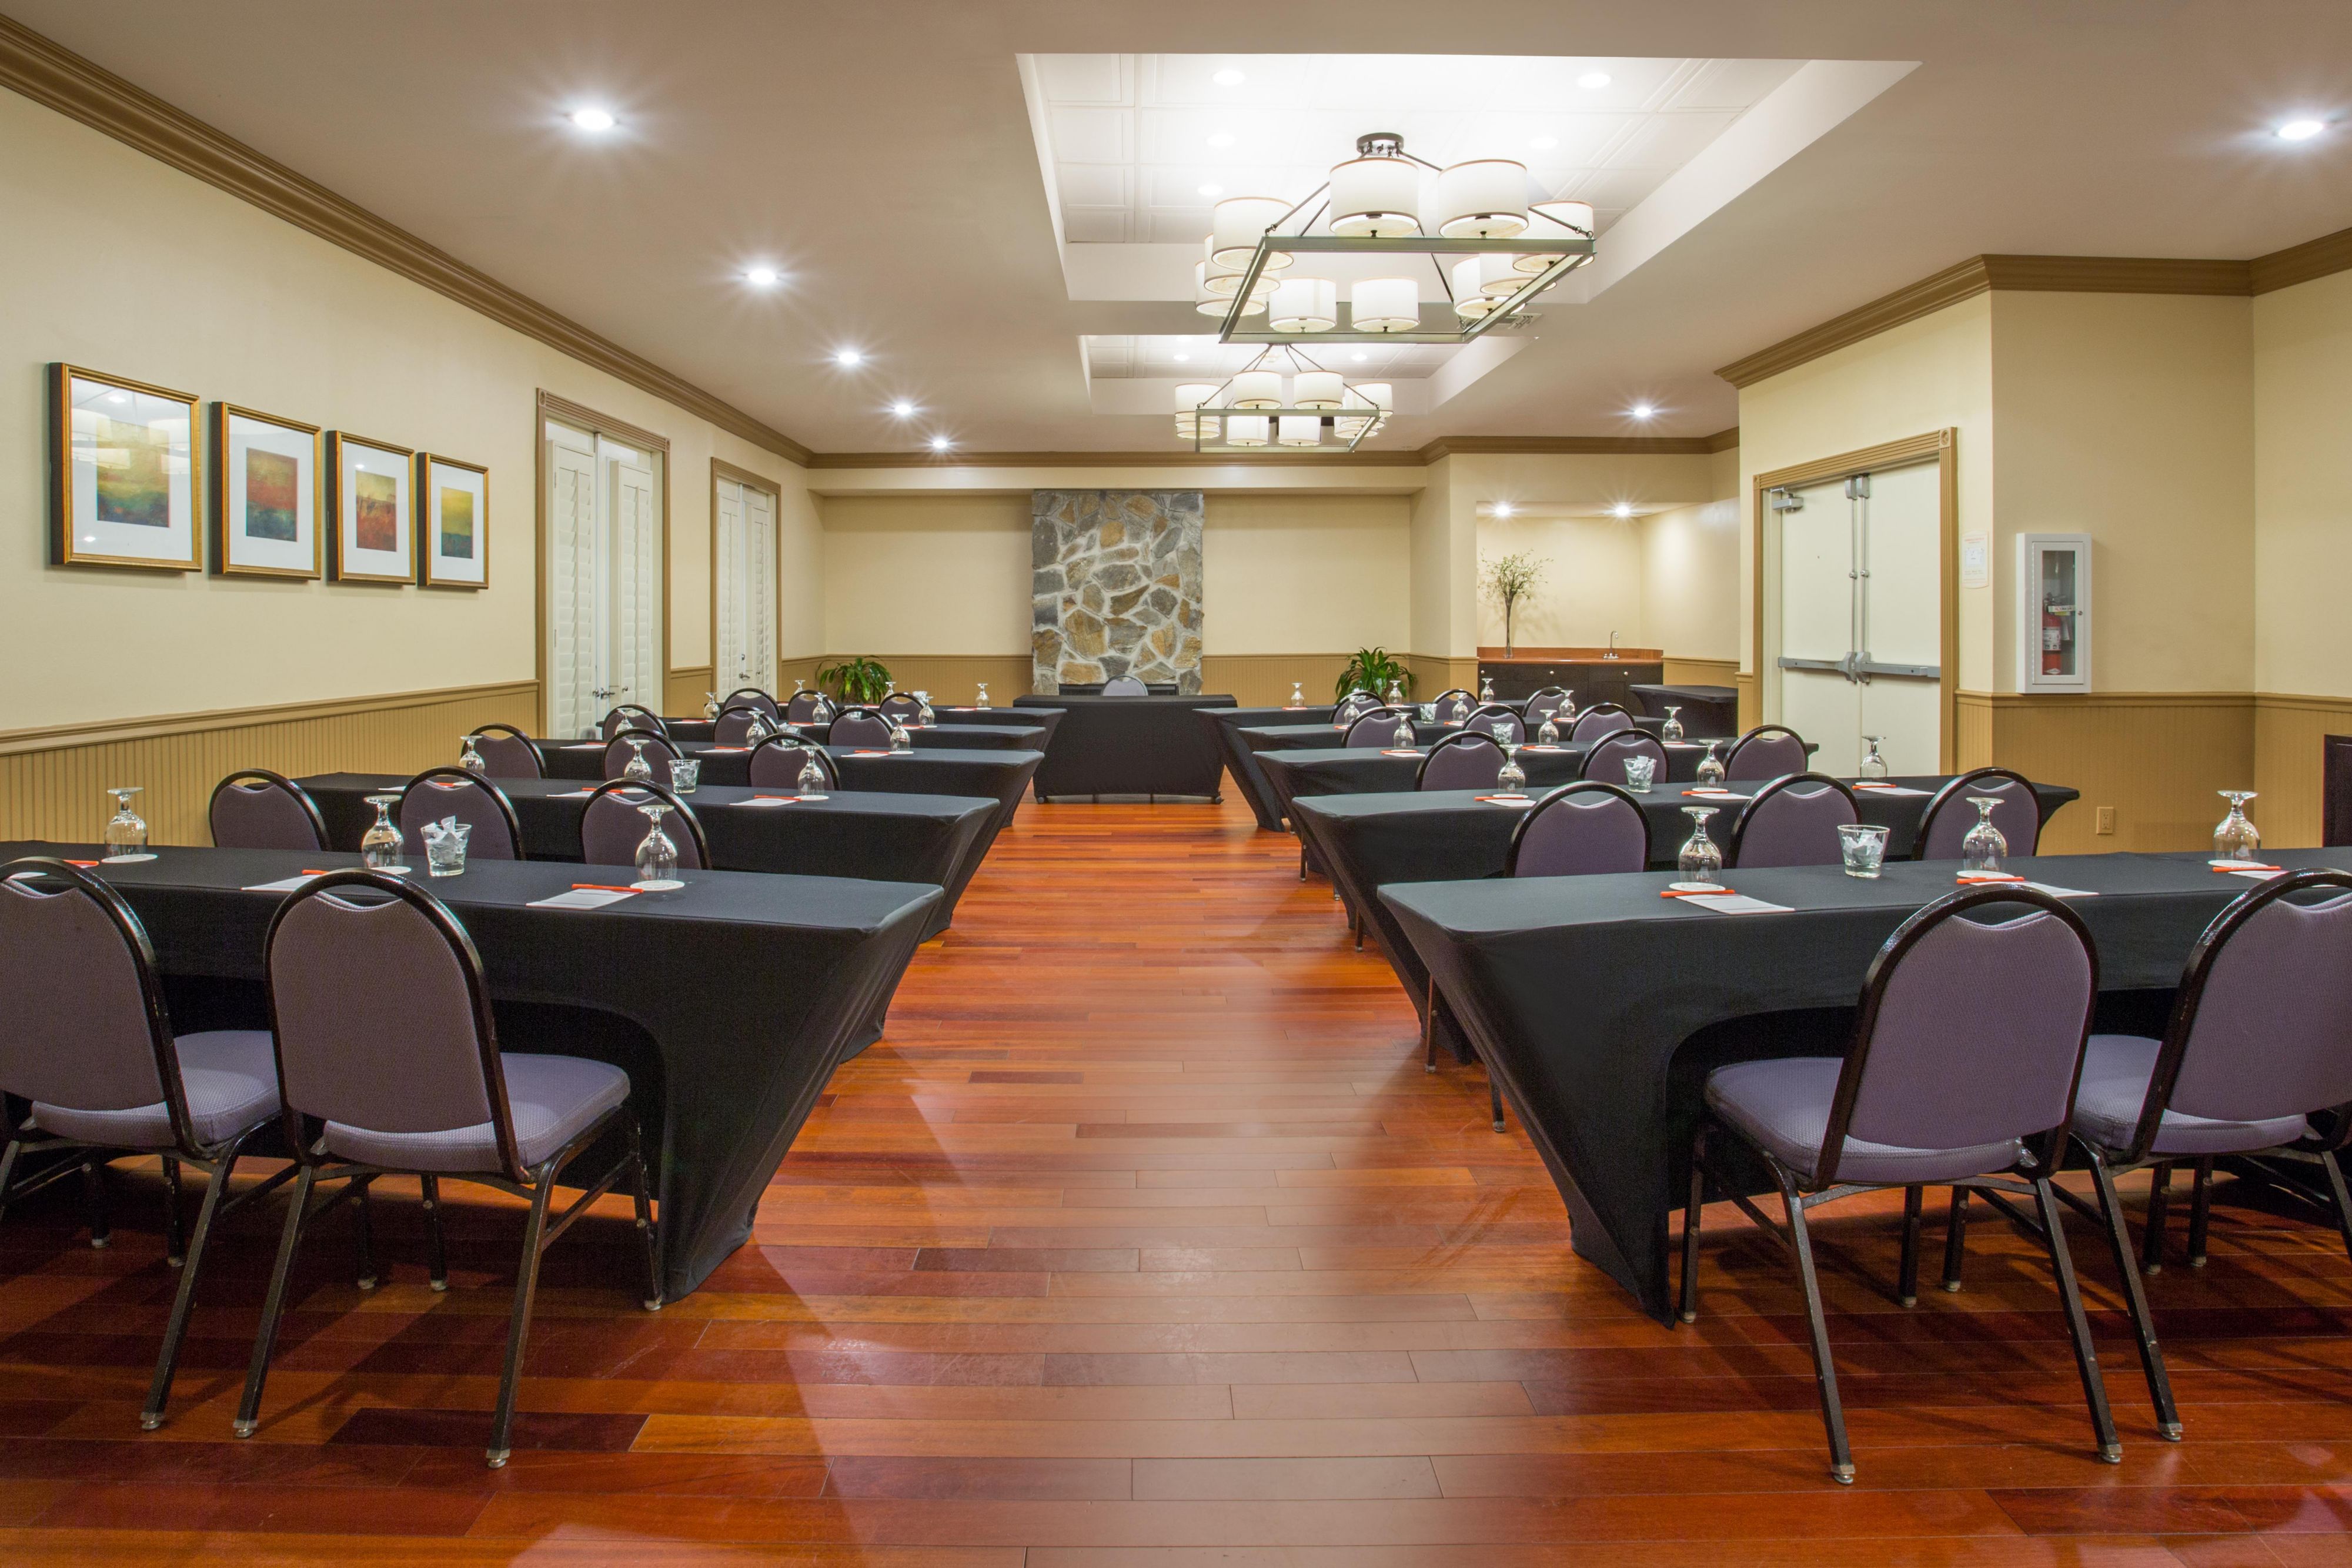 Plan your business meeting at the Crowne Plaza Orlando-Downtown